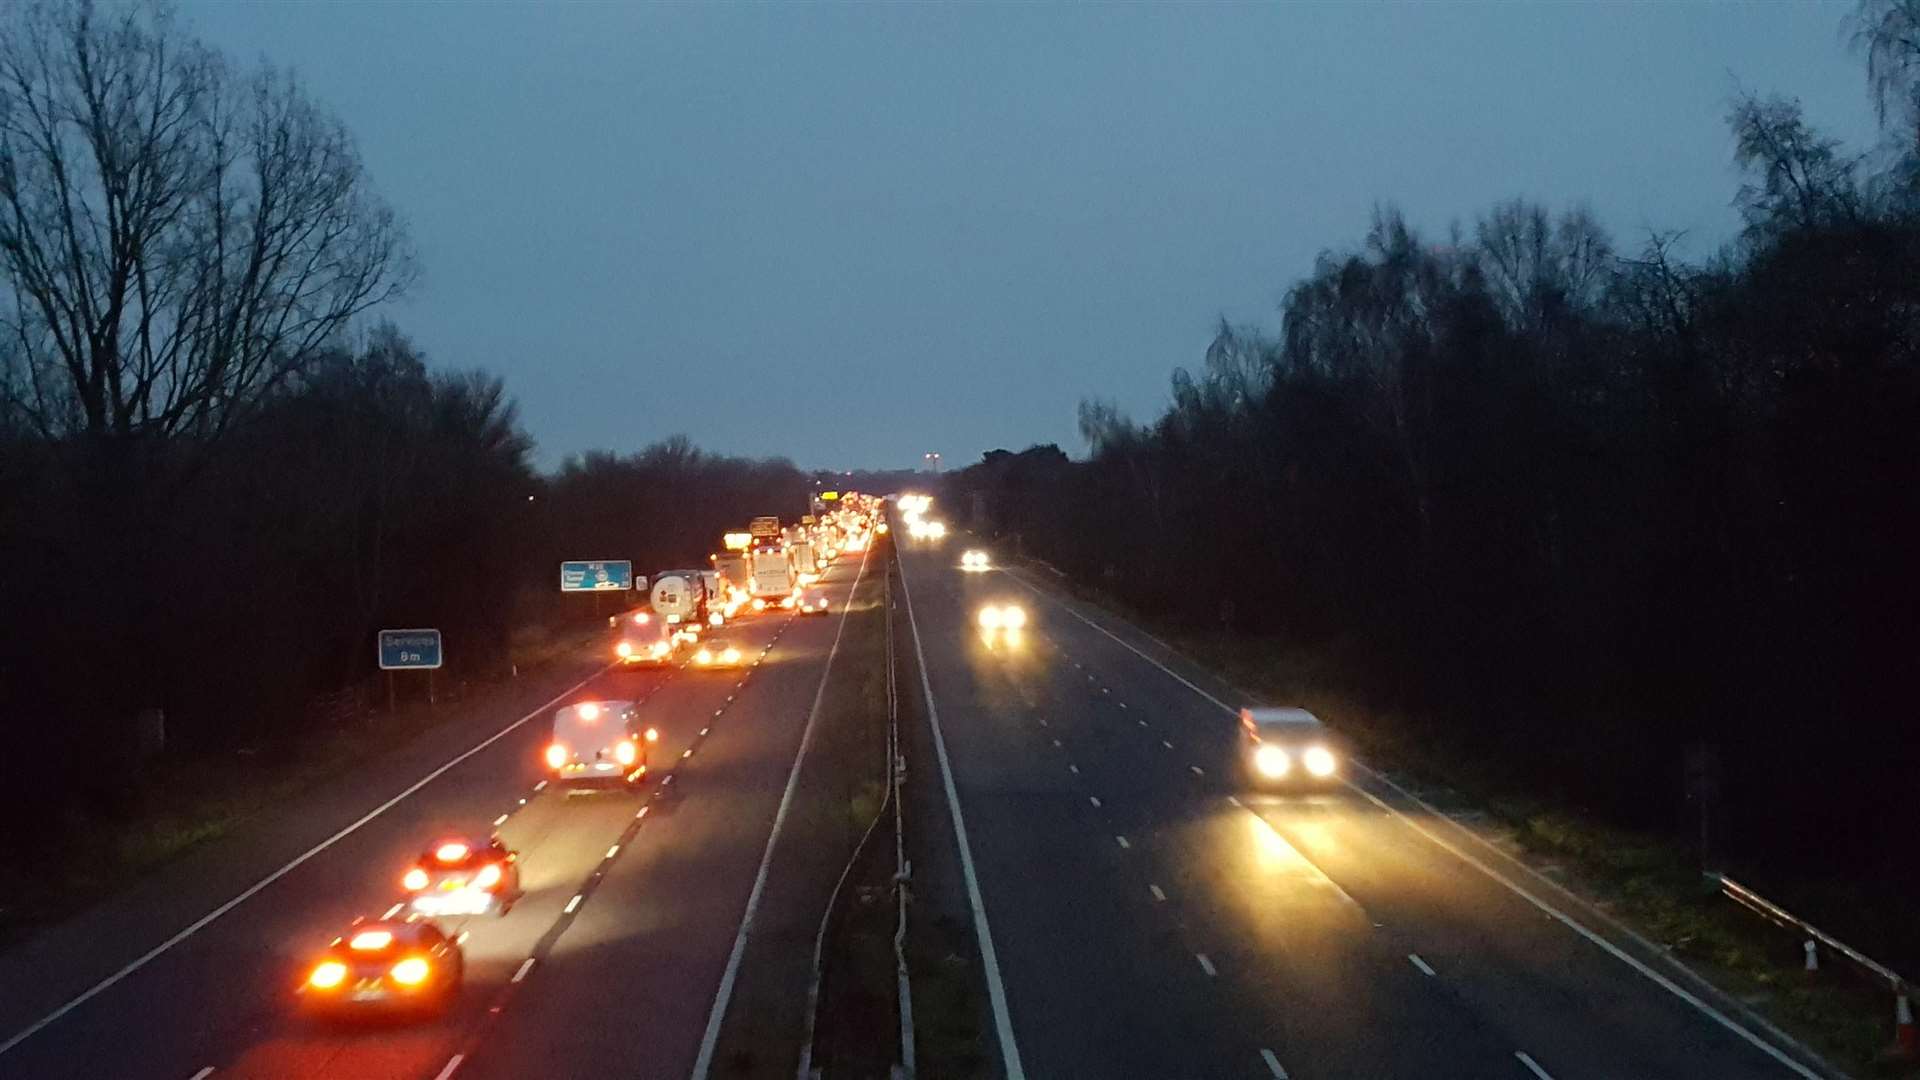 Traffic was held on the M20 between junctions 4 and 5.